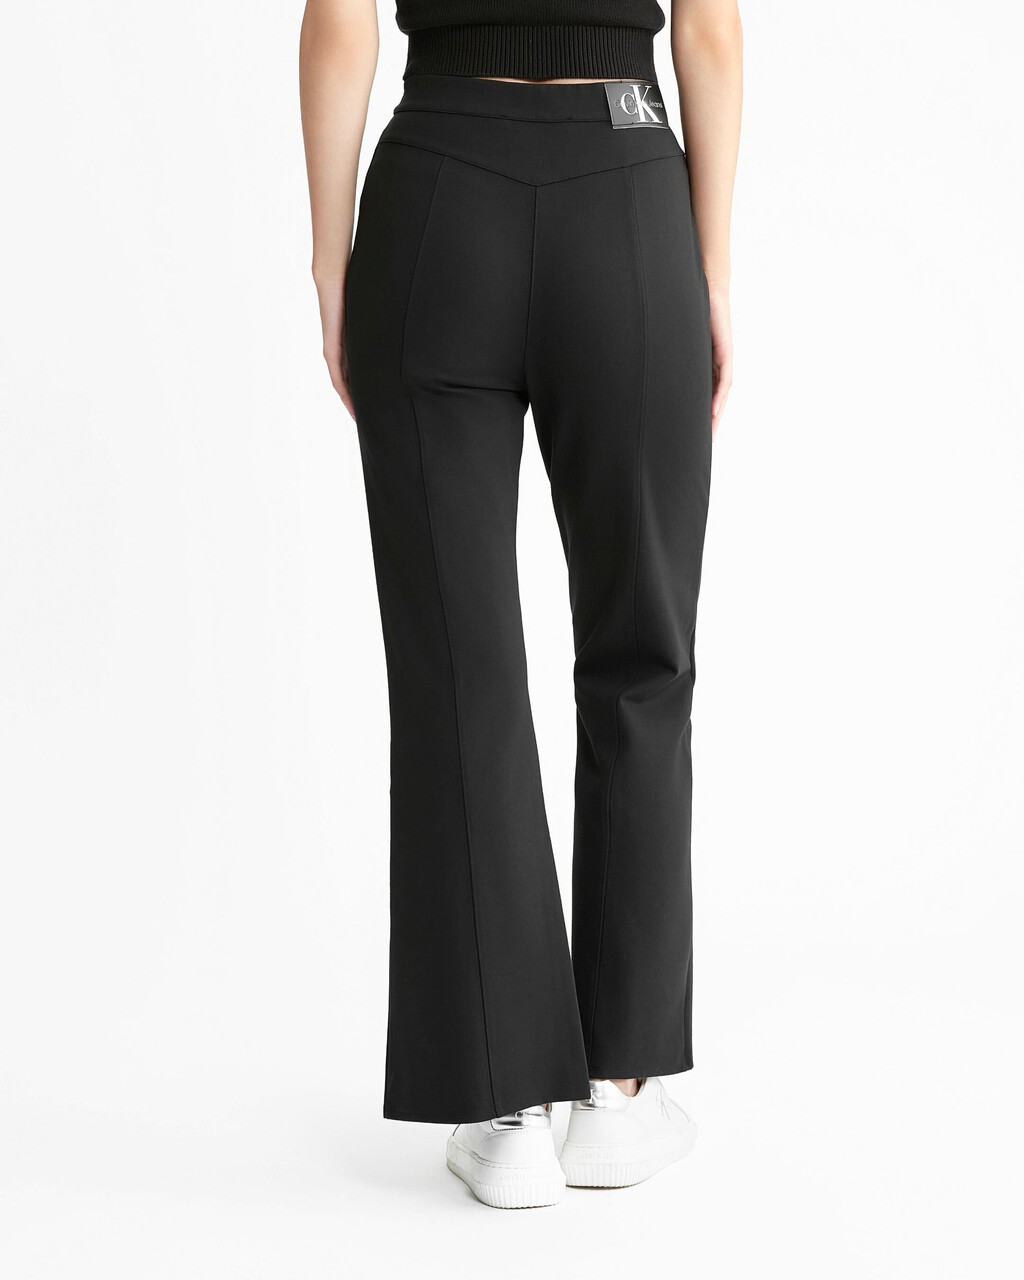 Connected Layers Milano Tapered Flare Pants, Ck Black, hi-res